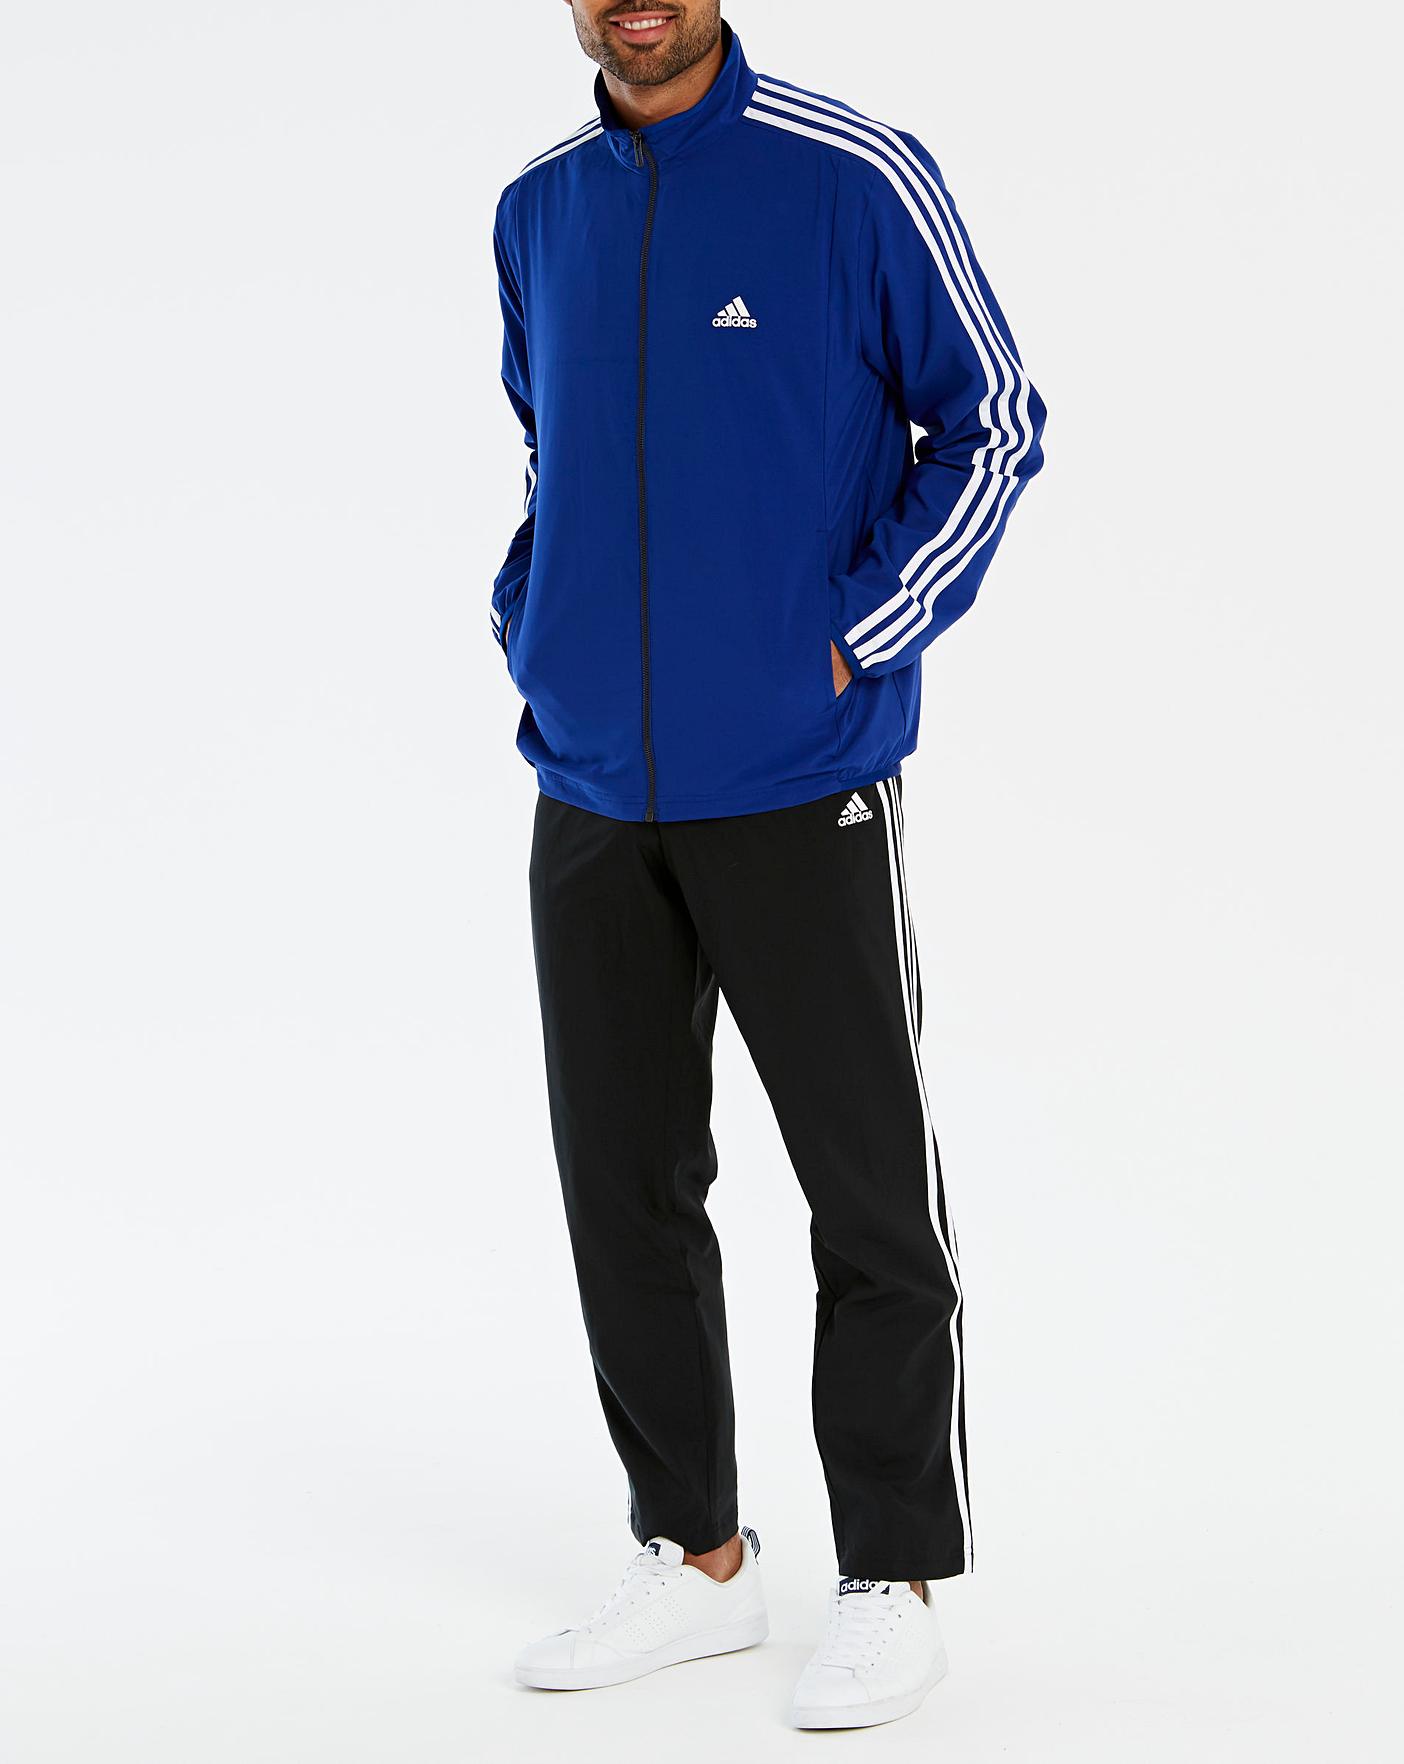 Adidas Woven Light Tracksuit | Oxendales